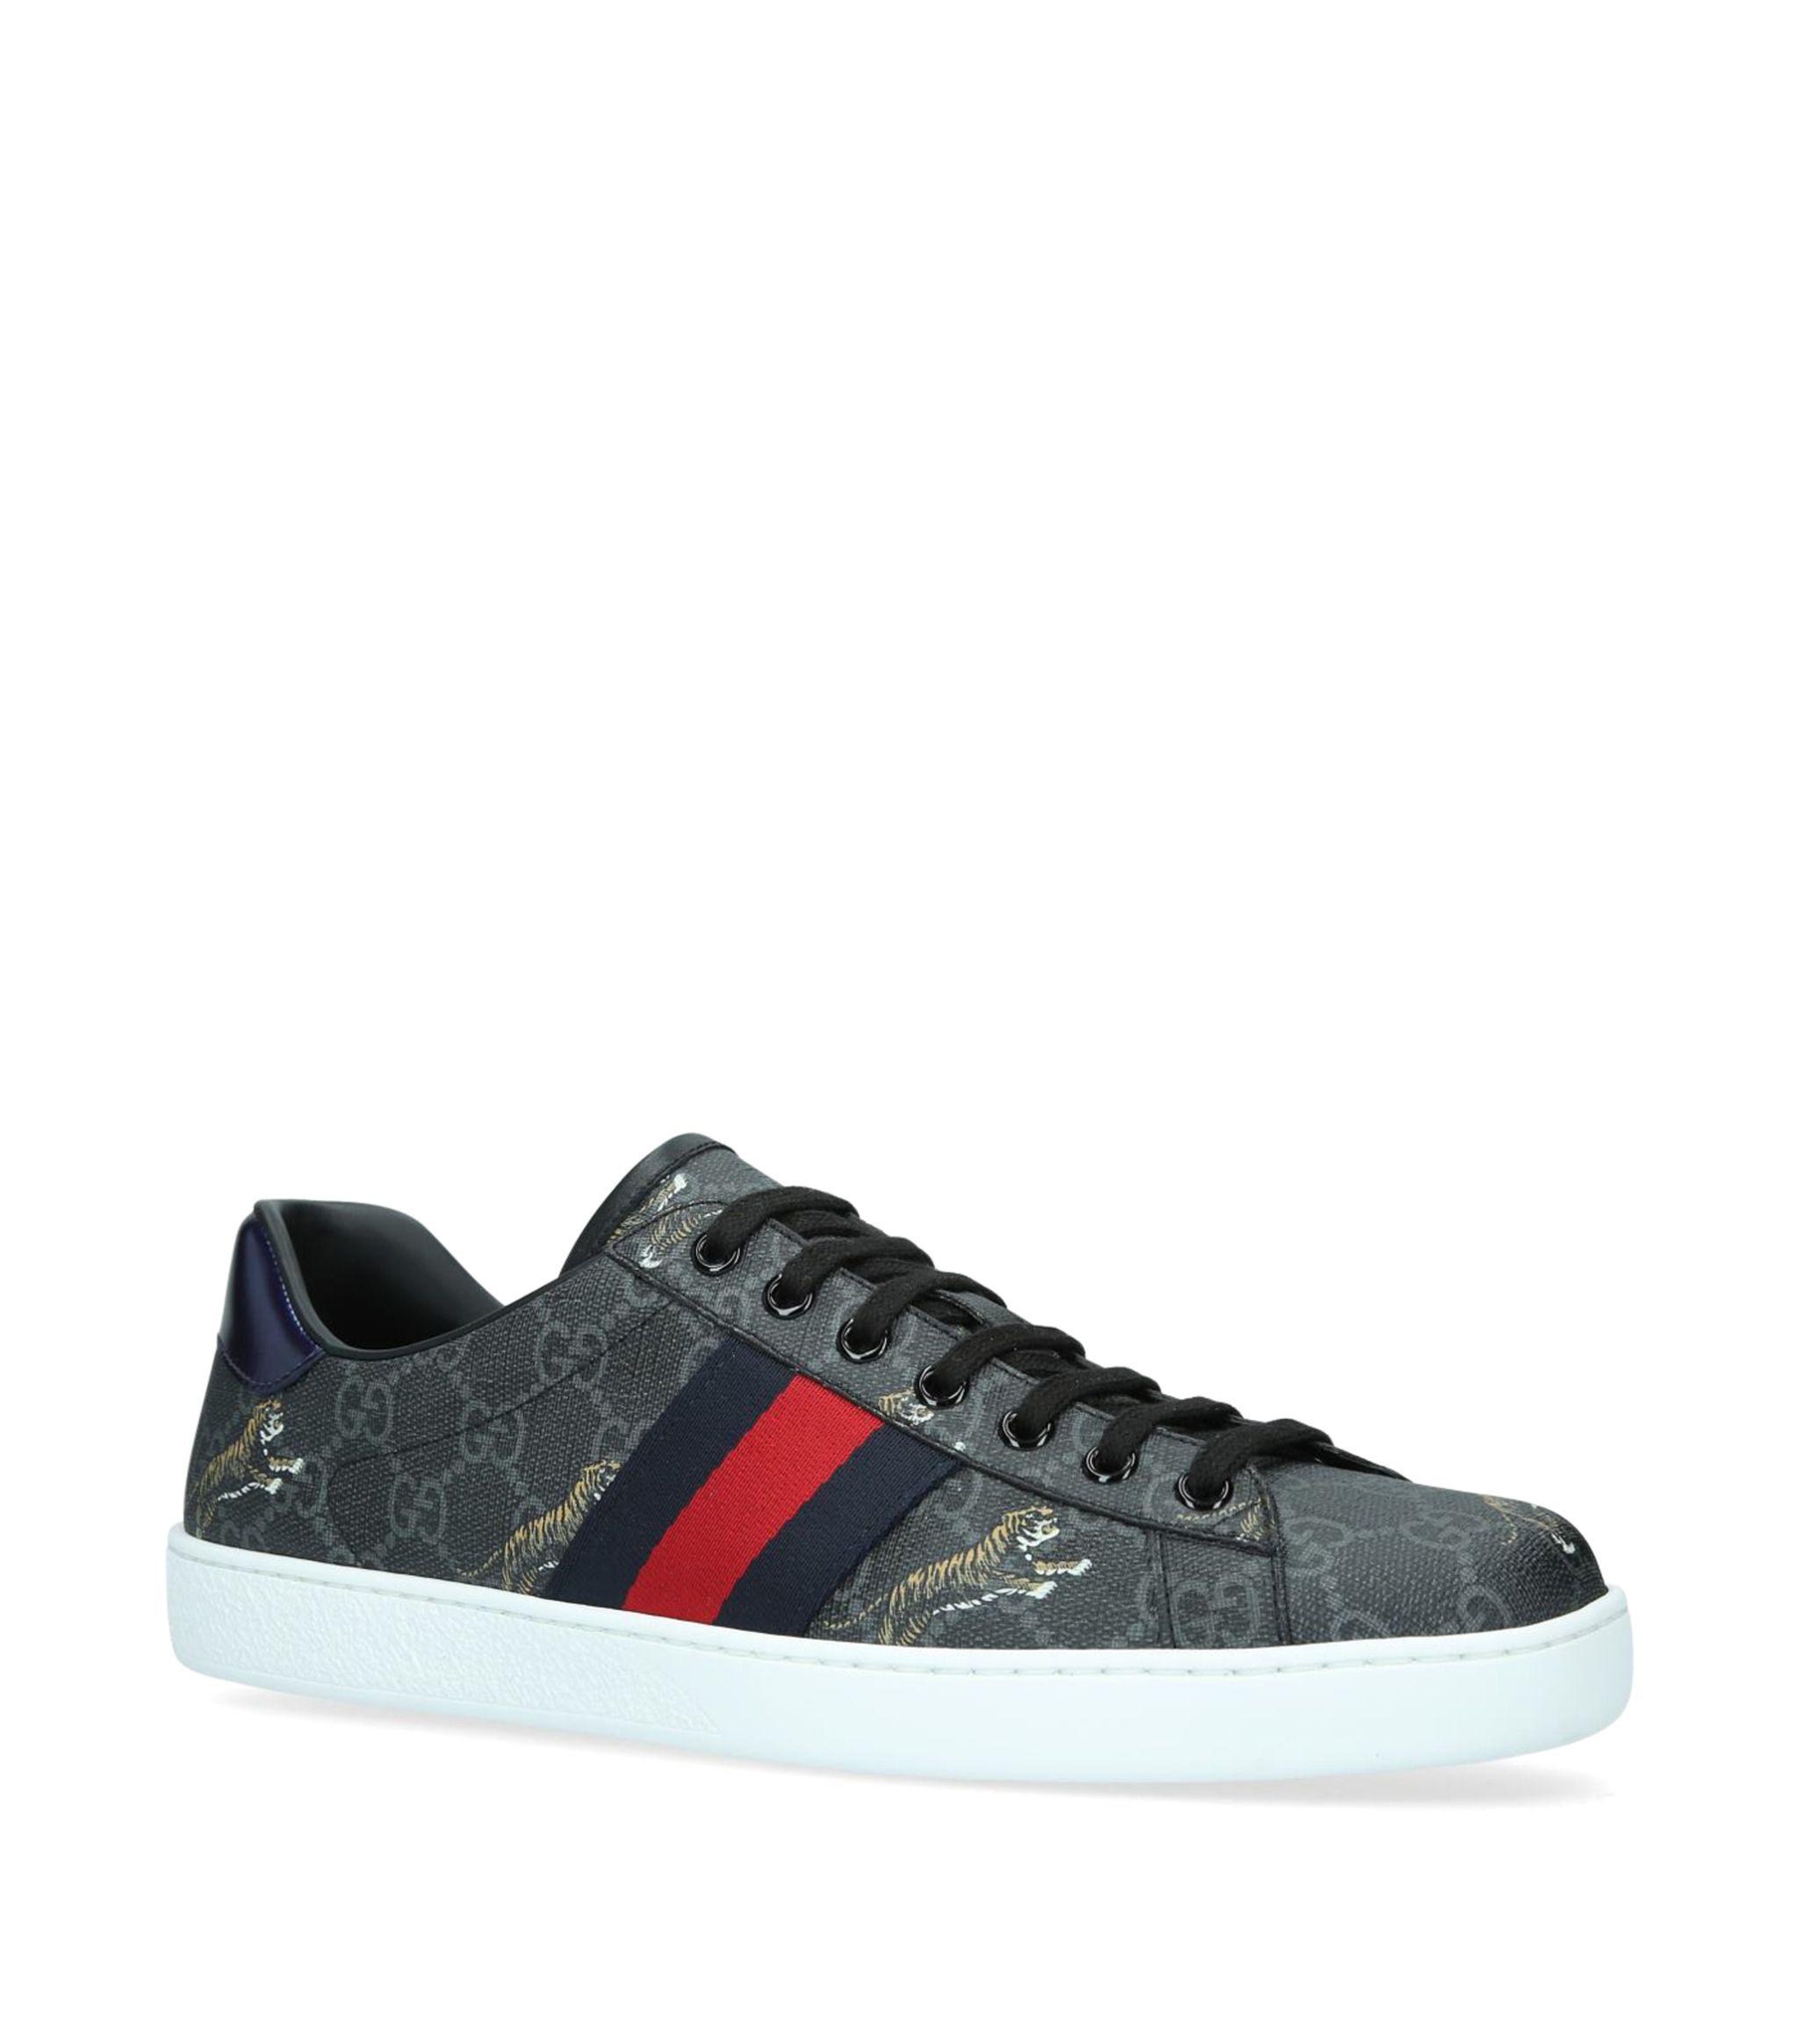 Gucci Leather New Ace GG Tiger Sneakers for Men - Save 15% - Lyst